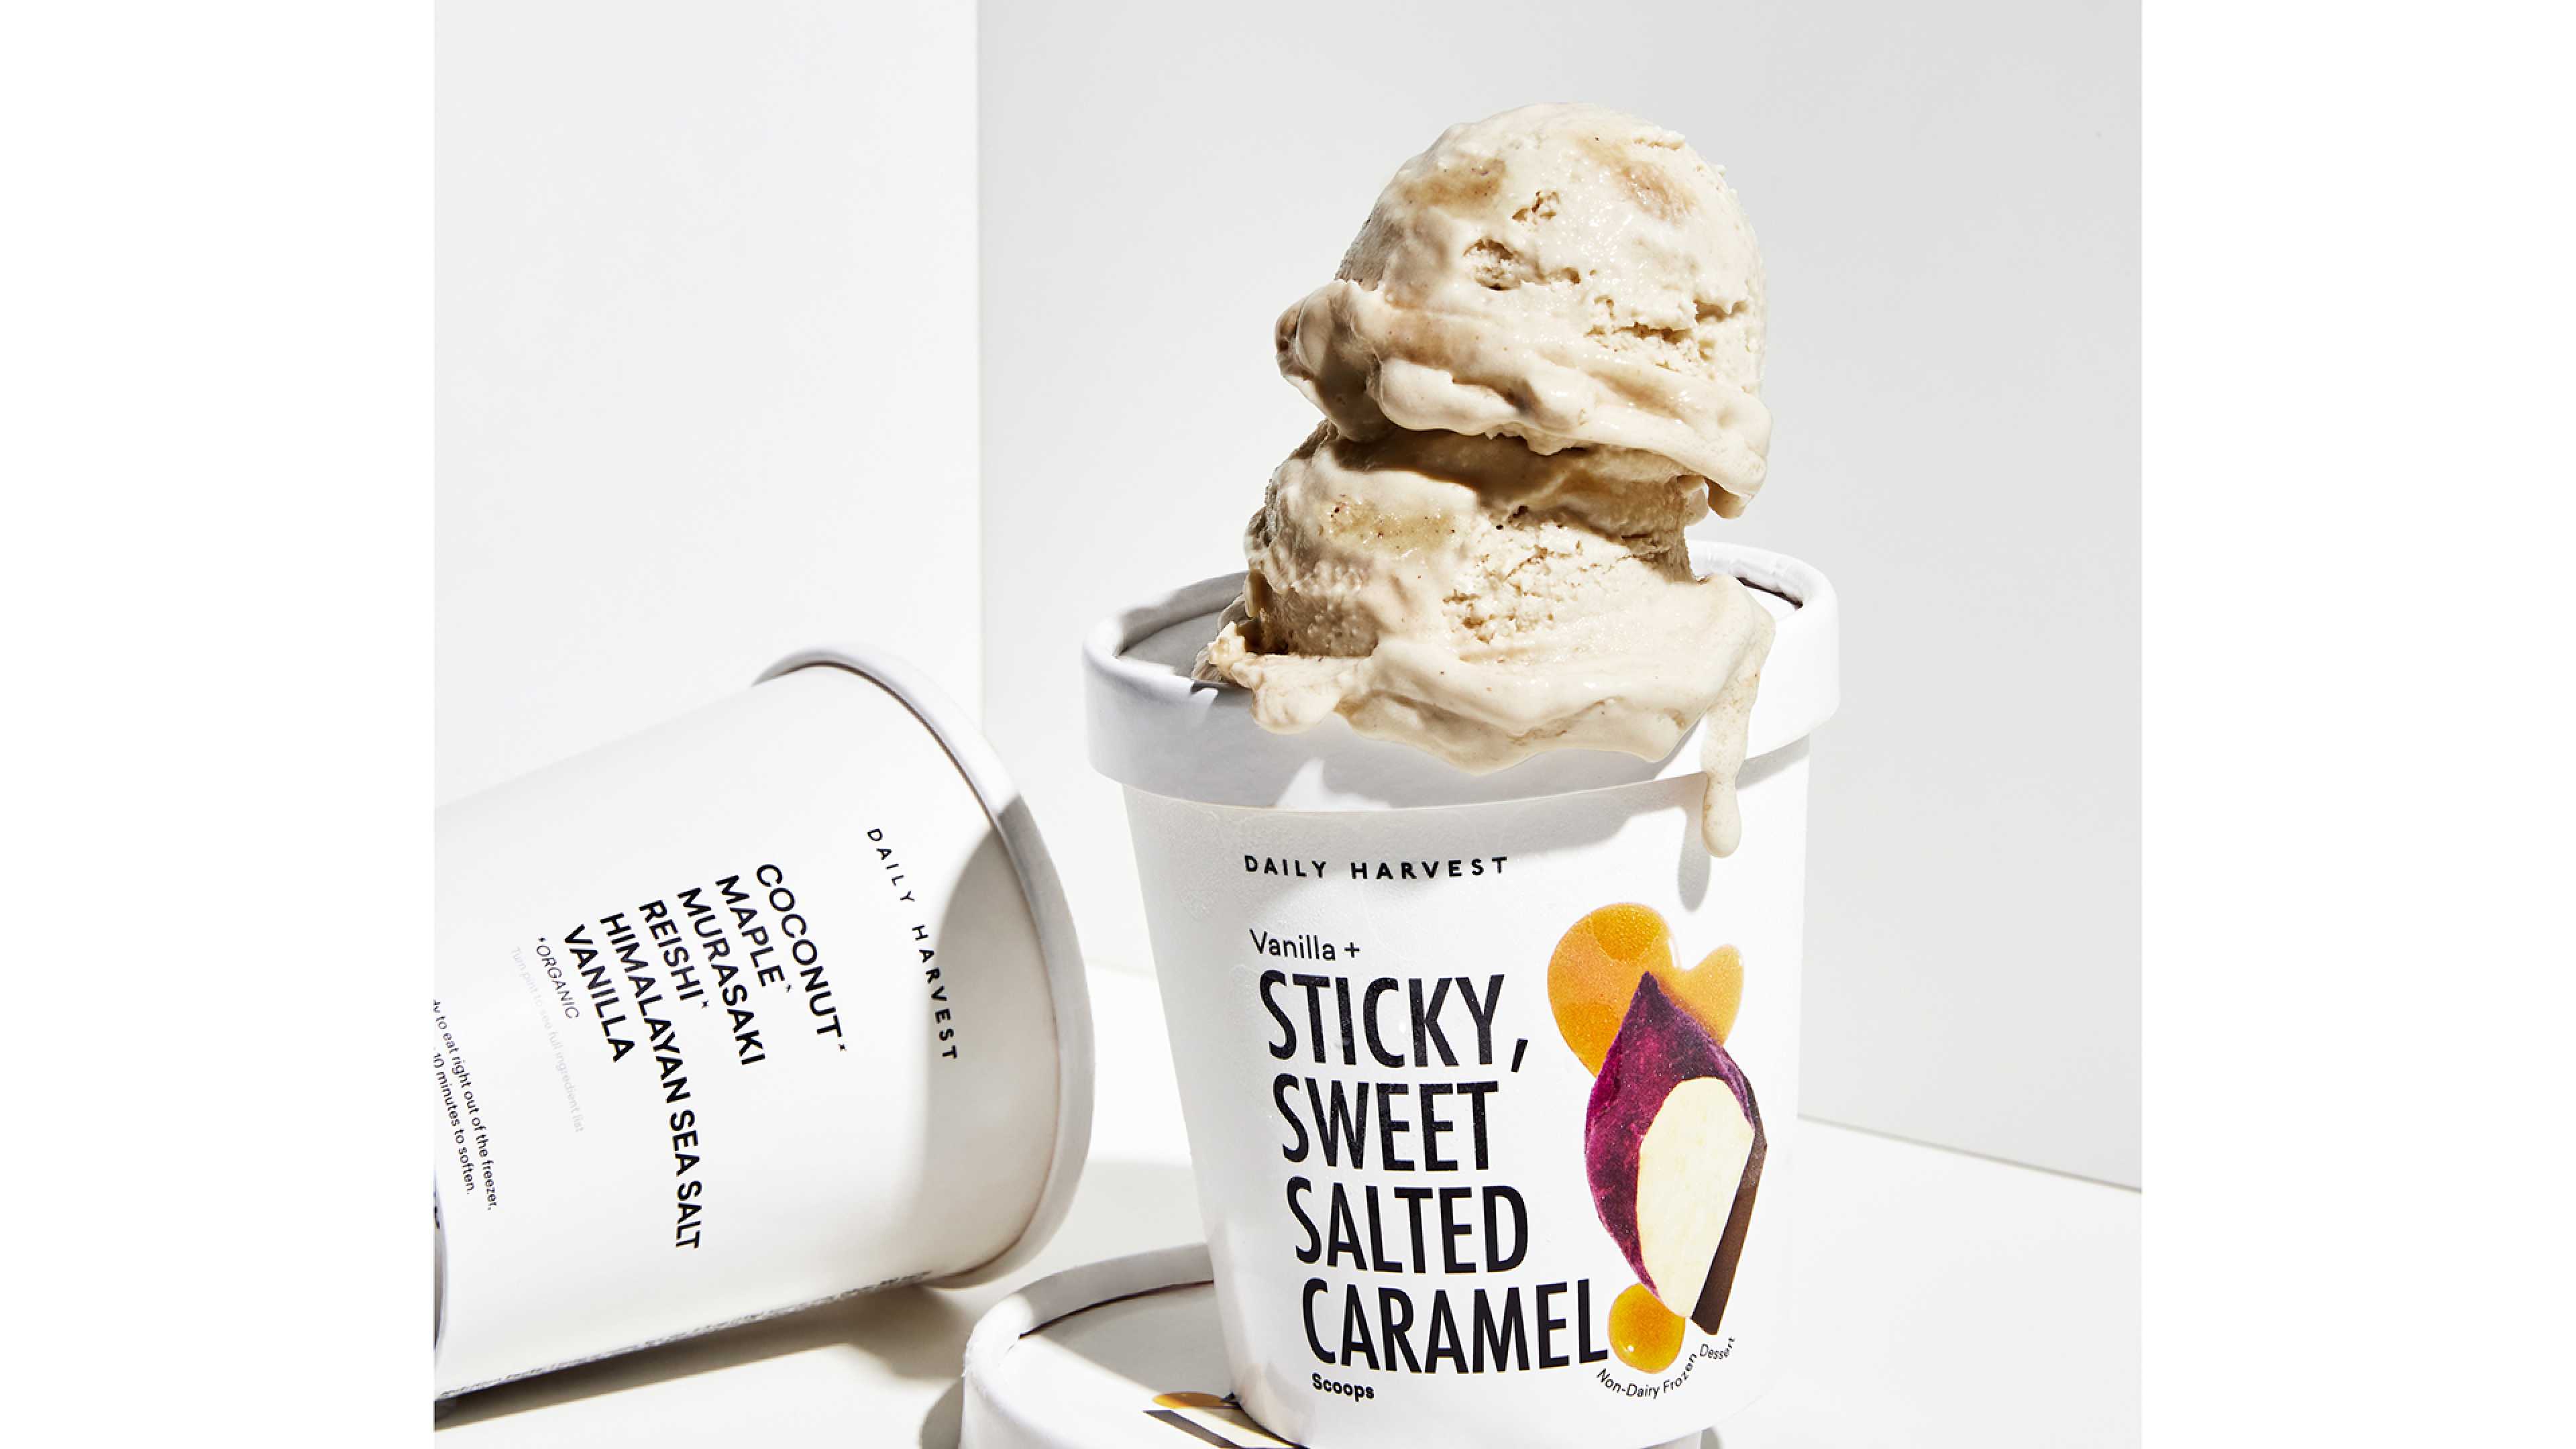 Daily Harvest Vanilla + Sticky, Sweet Salted Caramel Scoops 